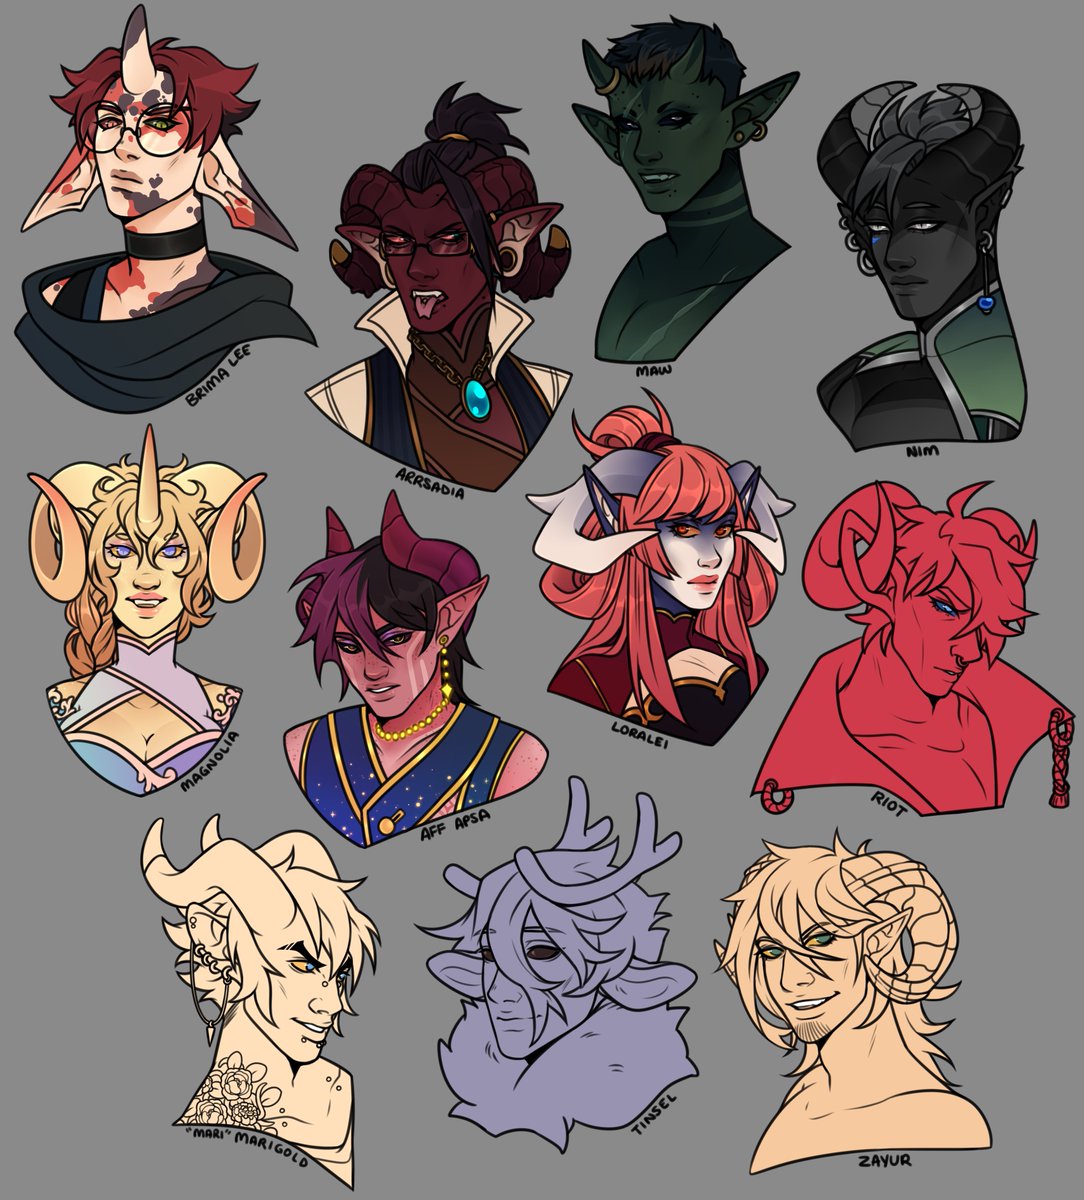 Eliza, Weissnoir, almost the rest of my Tieflings (I need to draw all of them someday), and Ilbus.